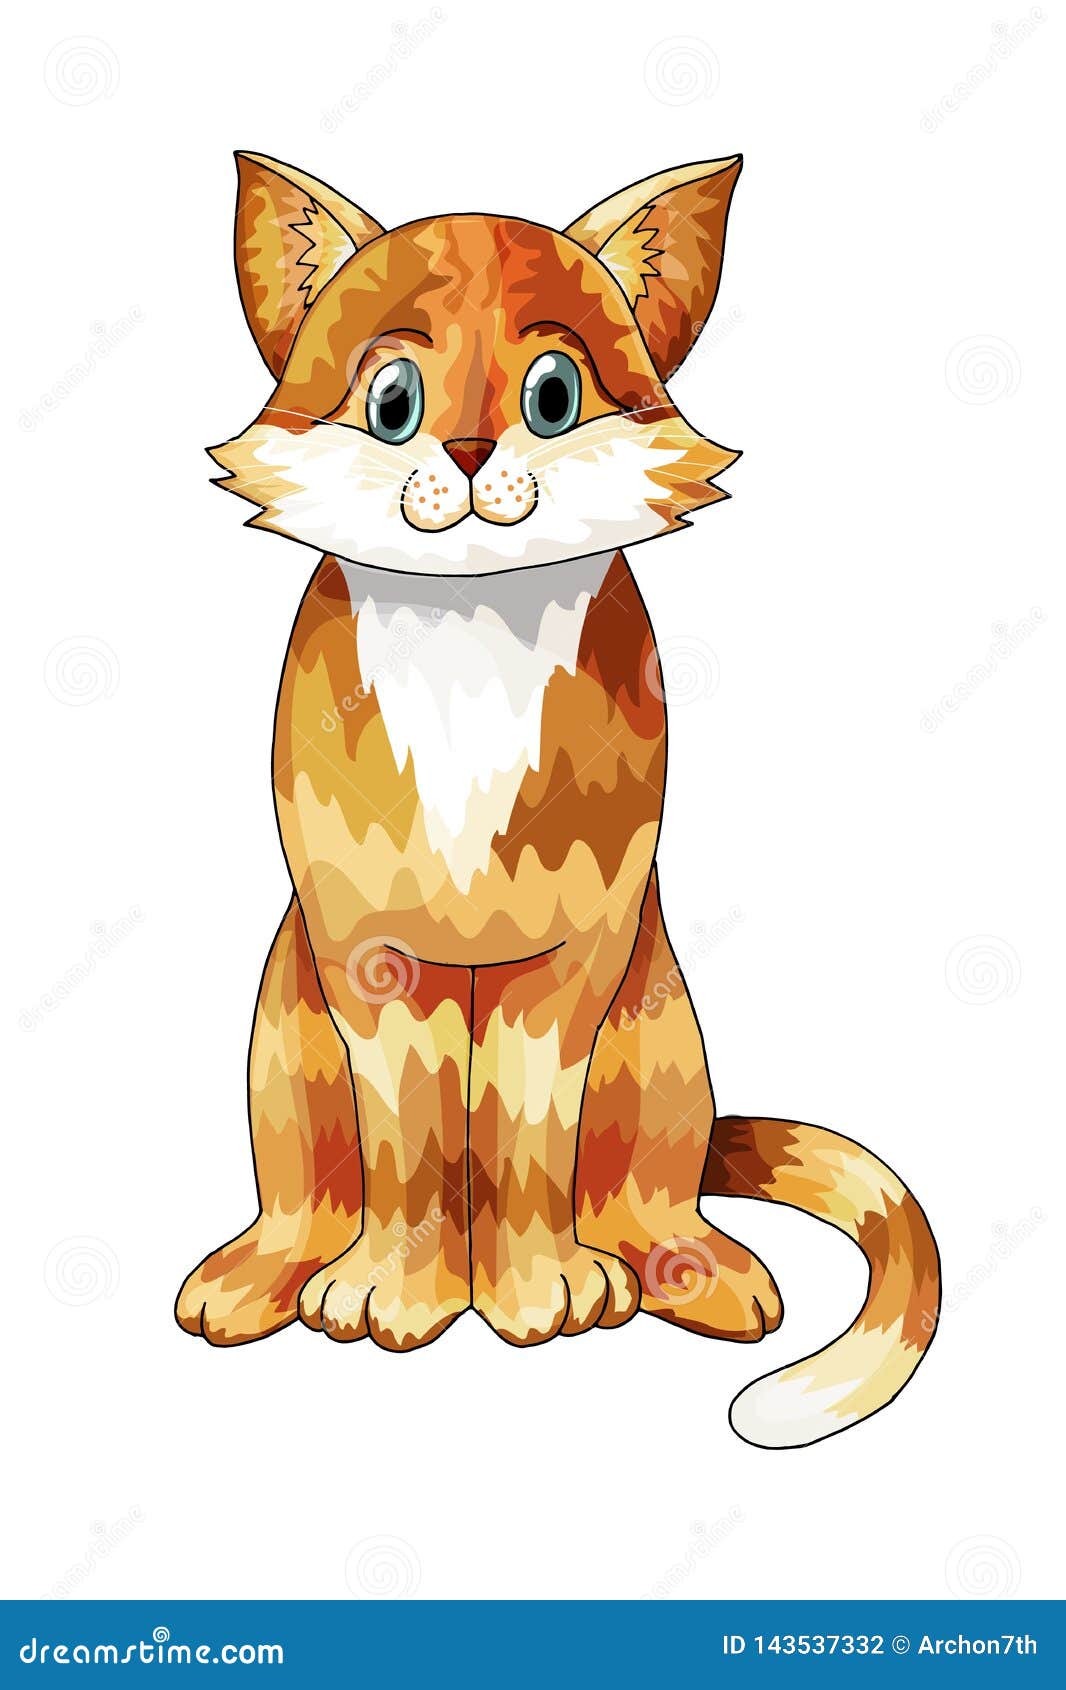 Cute Happy Cartoon Cat Character Hand Drawn Colored Doodle Vector Illustration Stock Vector Illustration Of Kitty Cheerful